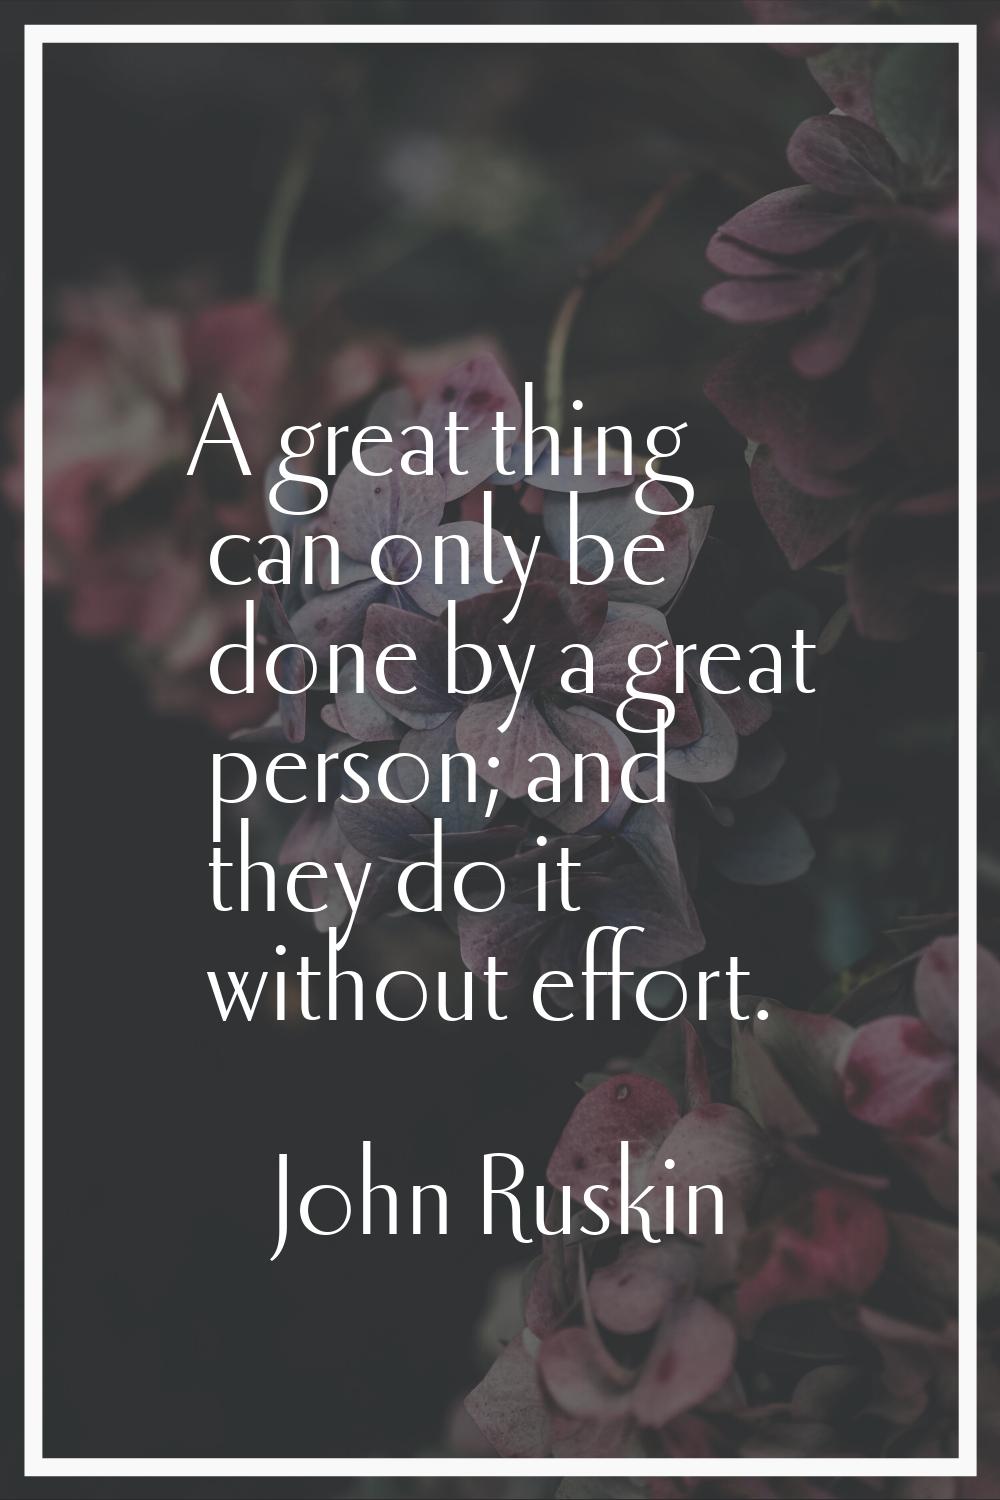 A great thing can only be done by a great person; and they do it without effort.